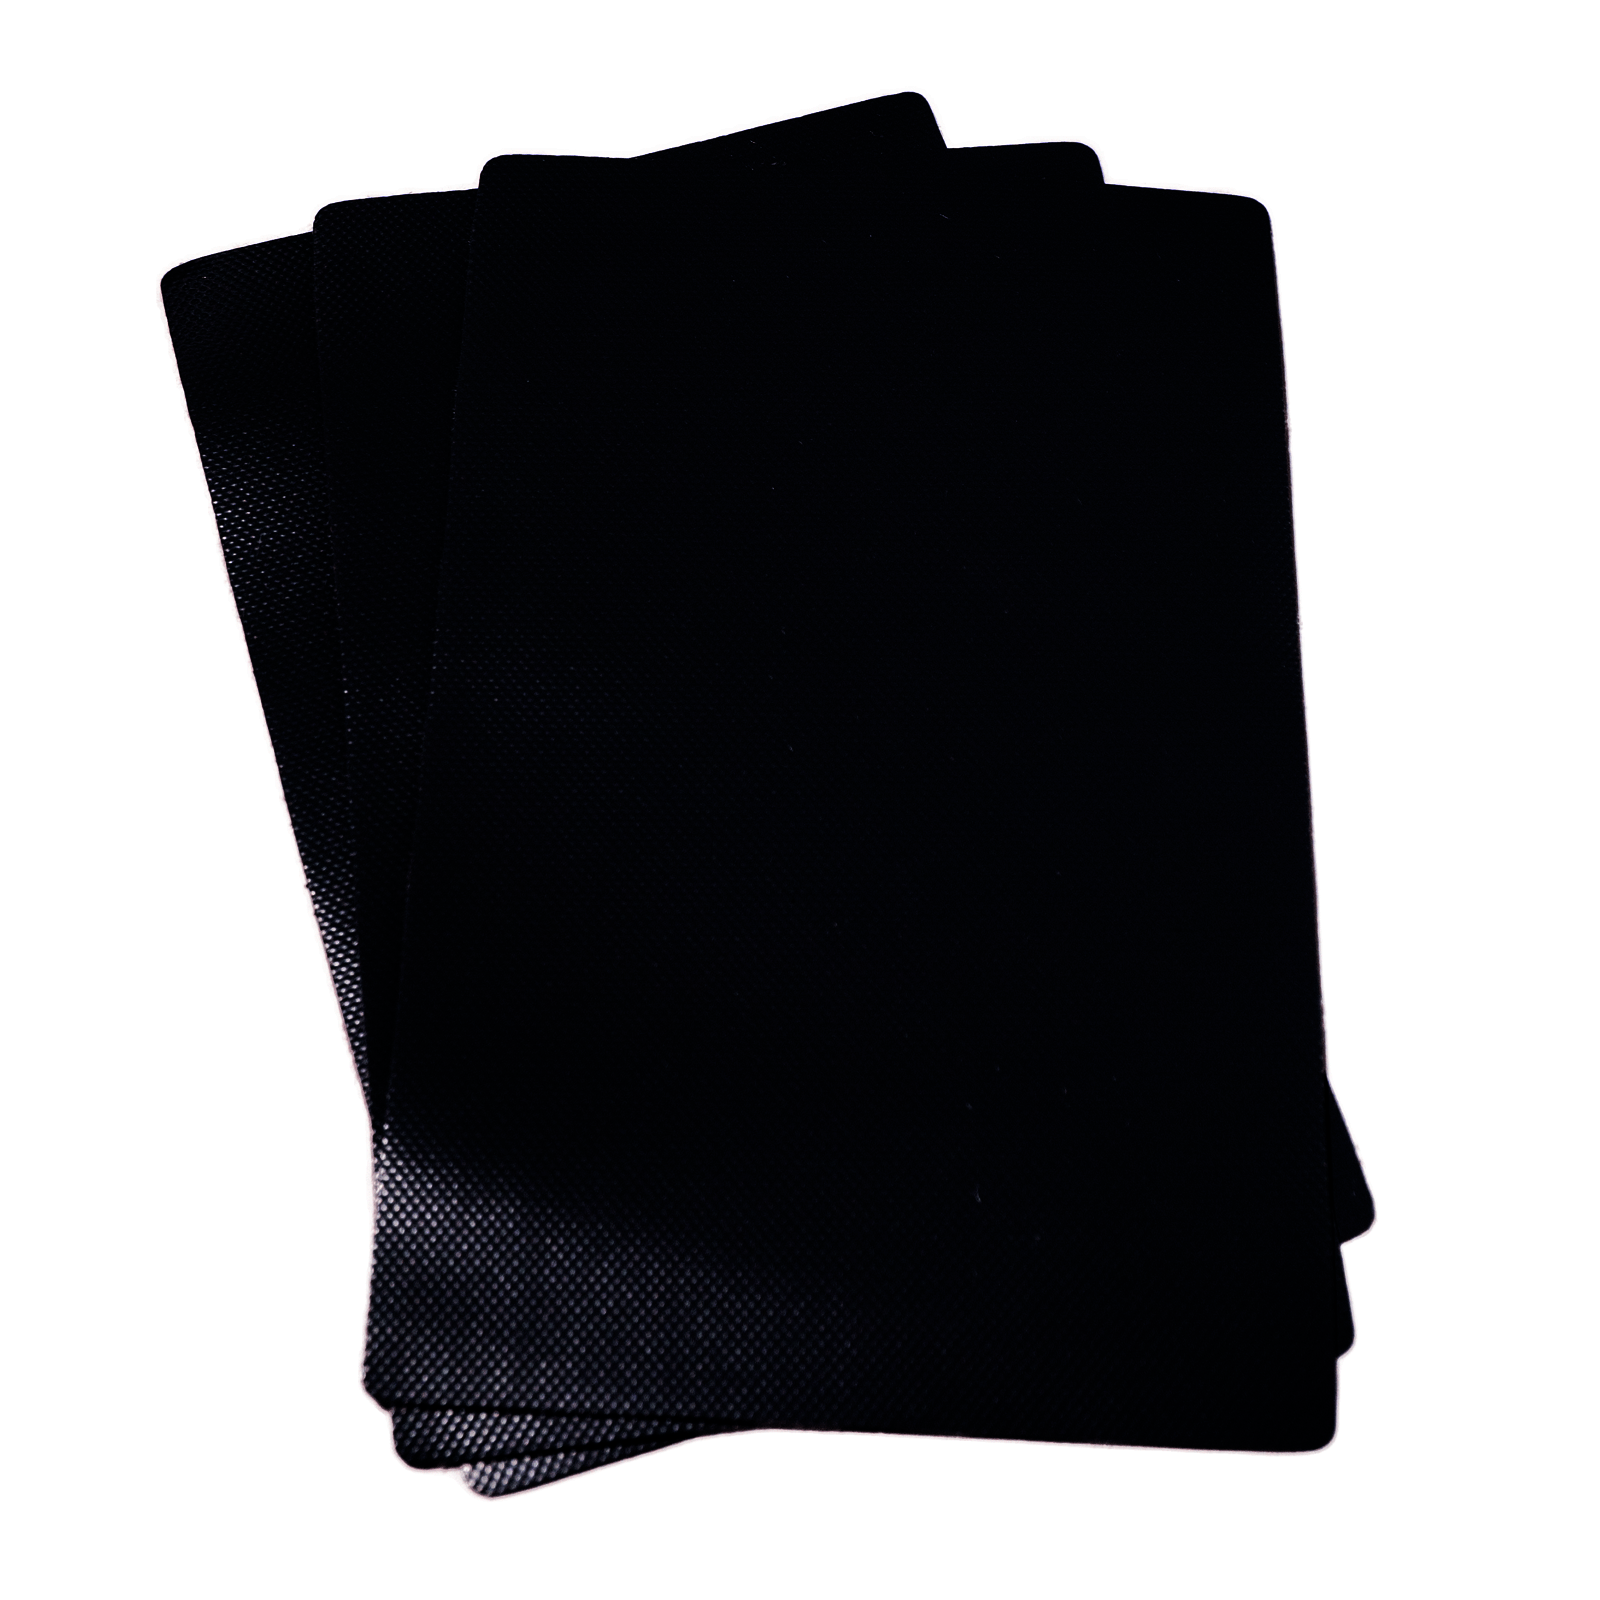 PVC Patch Material - Swellfish Outdoor Equipment Co.